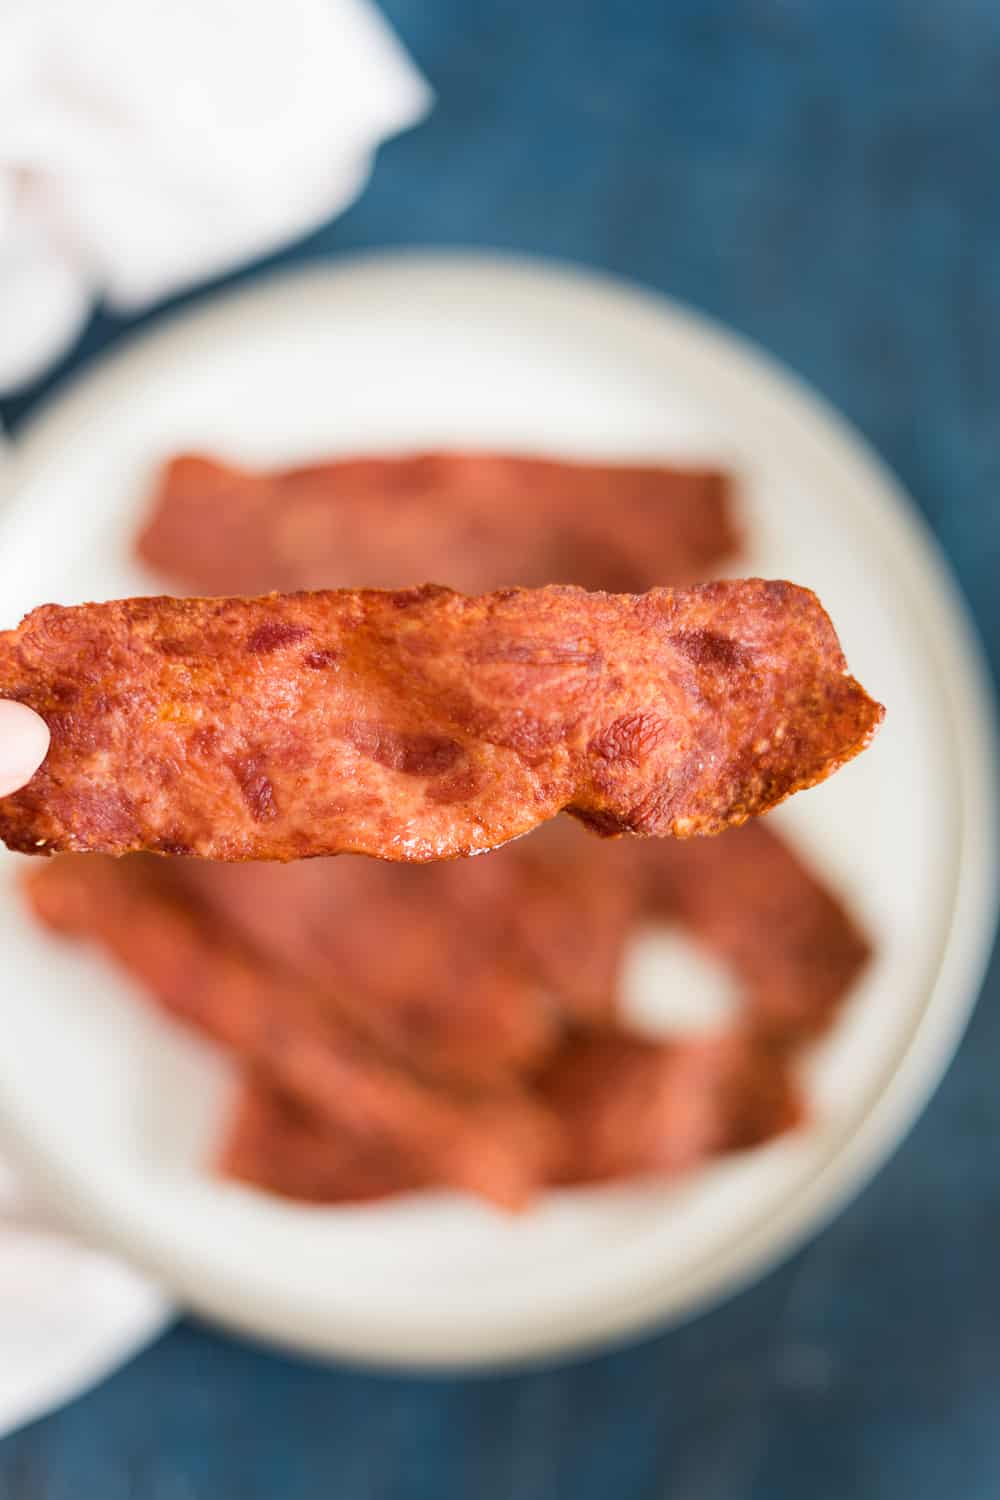 Hold a large piece of turkey bacon after frying in the air until crisp.